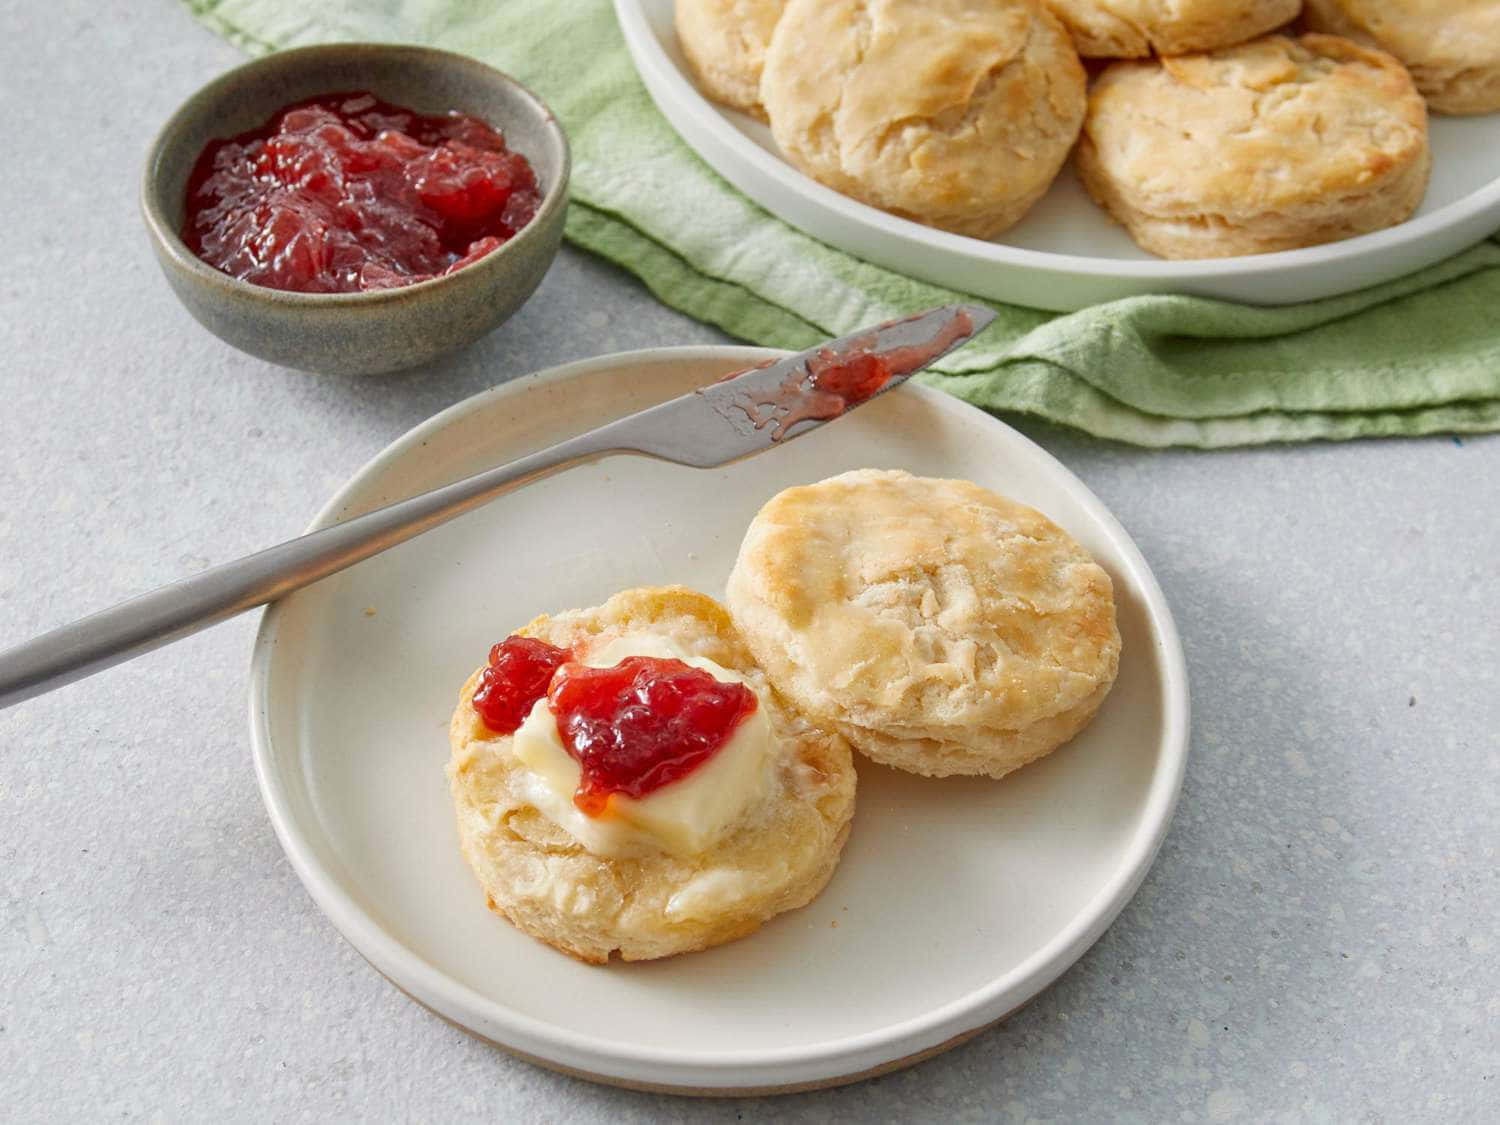 Enjoy the delicious taste of freshly baked biscuits!